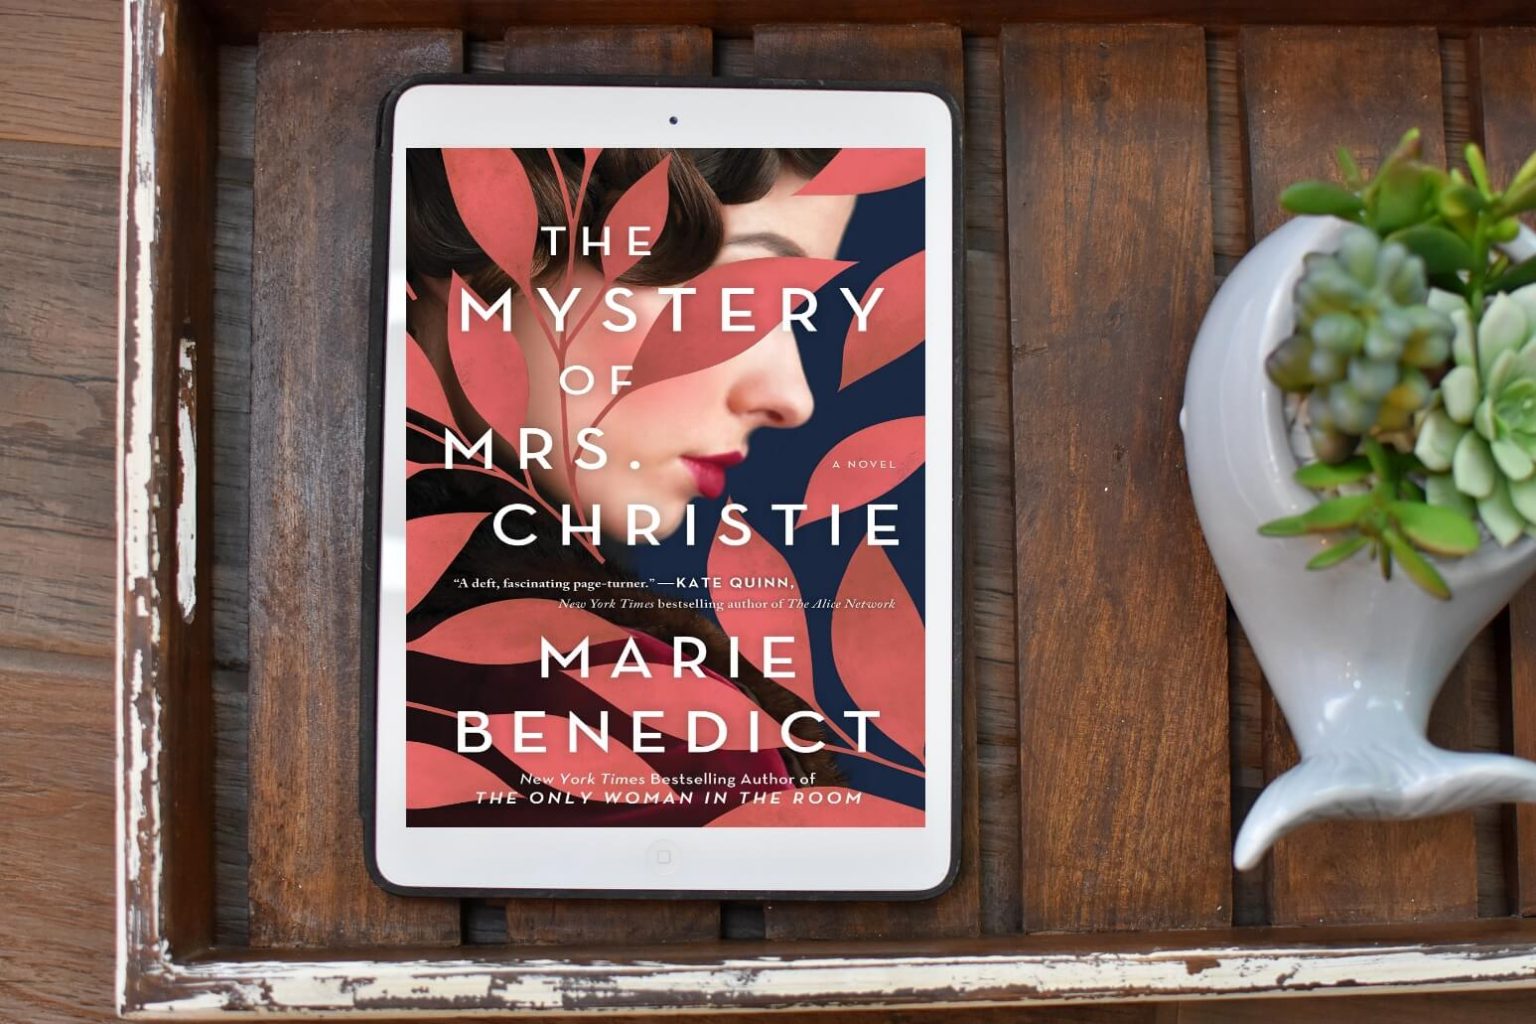 the mystery of mrs christie ending